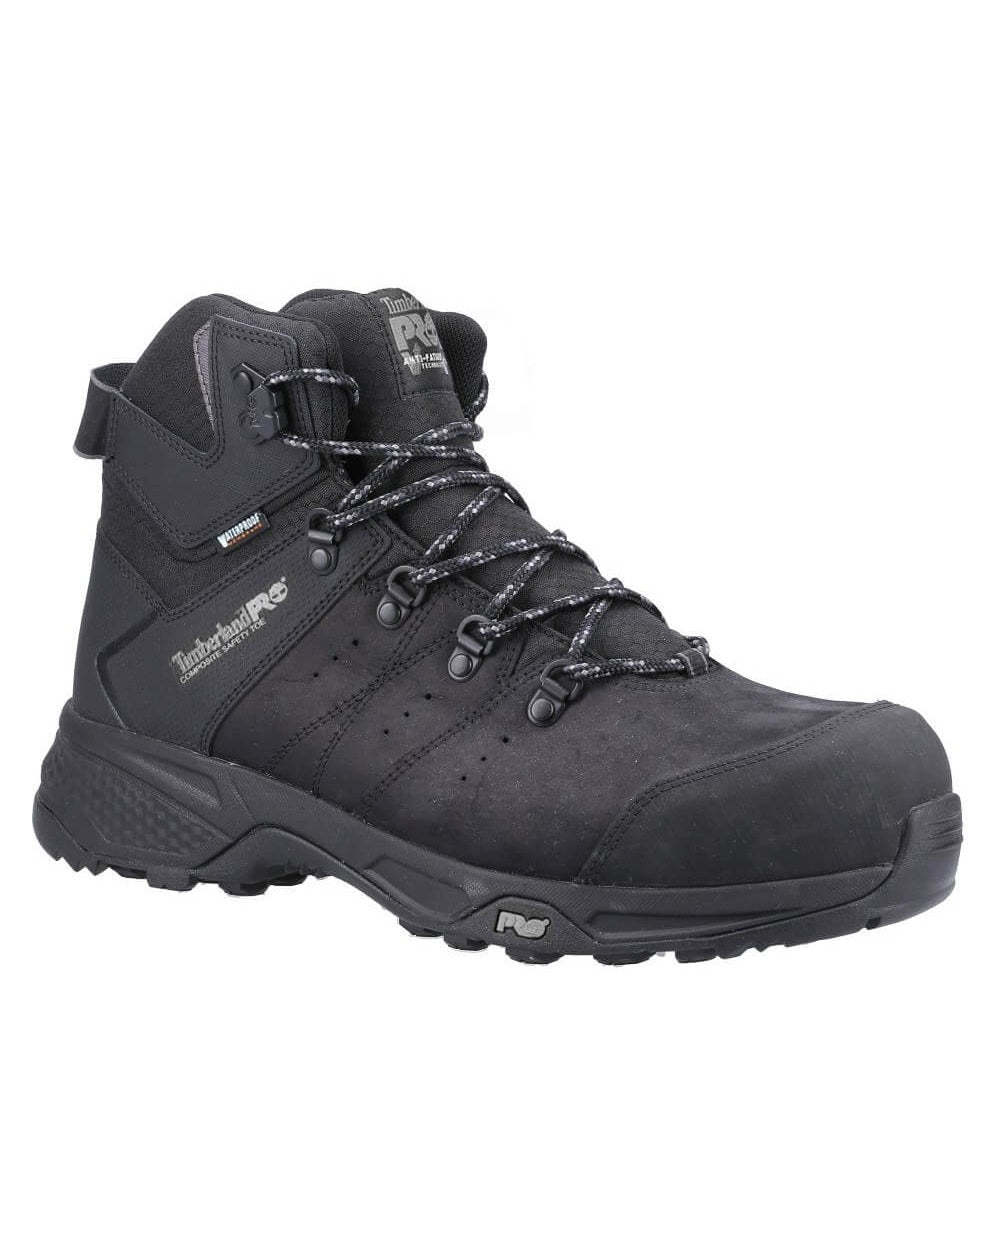 Black coloured Timberland Pro Switchback Work Boots on white background 